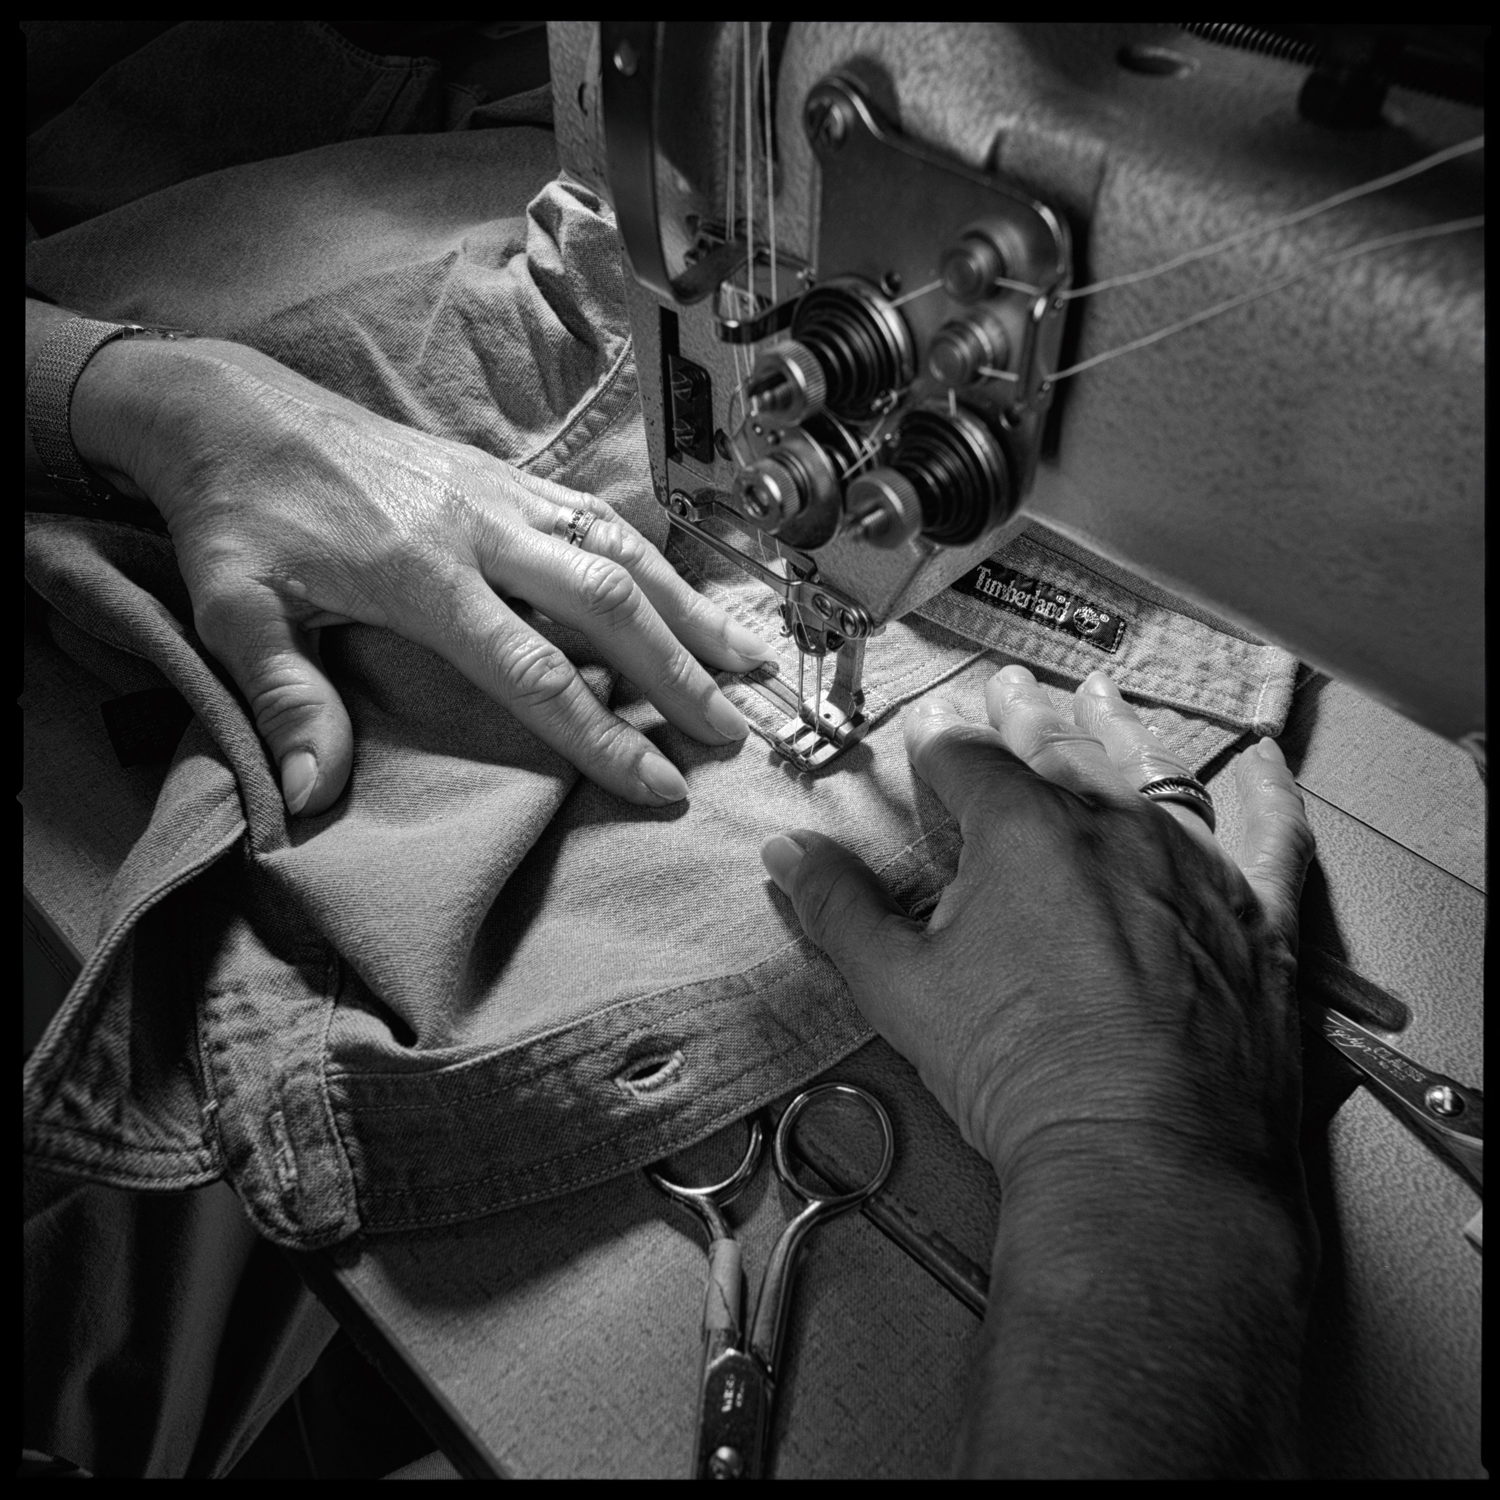 Timberland_at_work__sewing_machine_NIK_filters_Hasselblad_boarder_0007.jpg